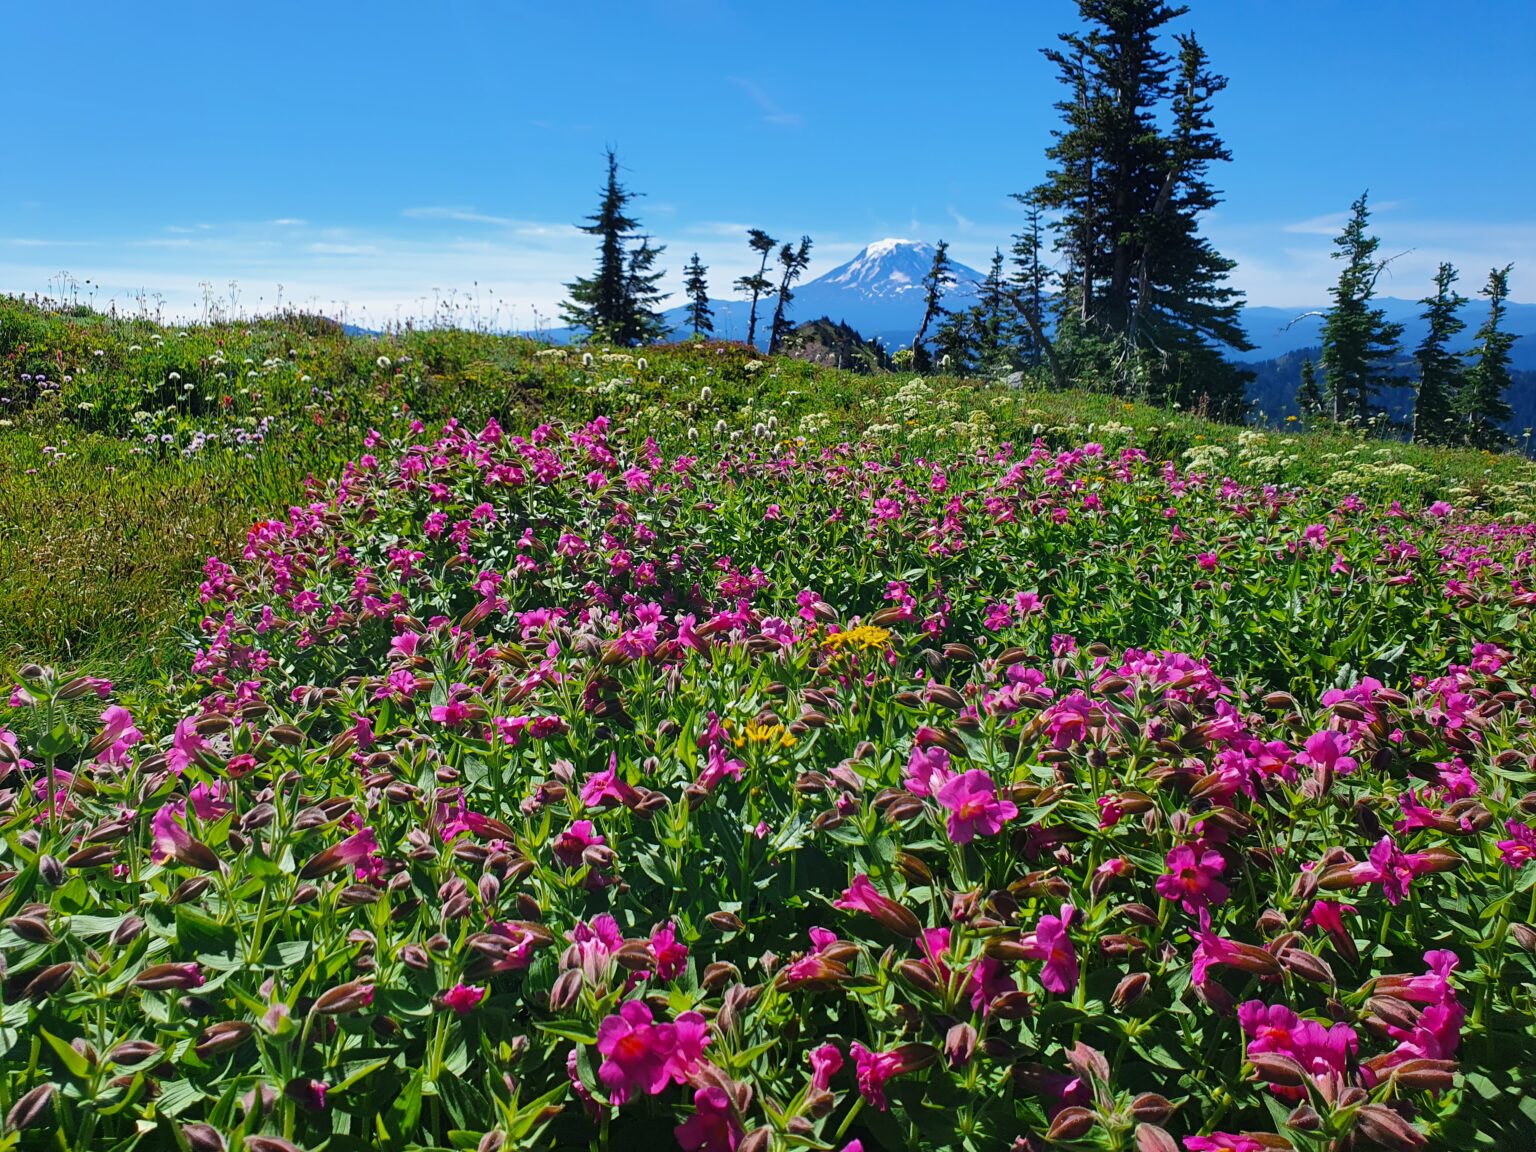 Mount Adams and wildflowers